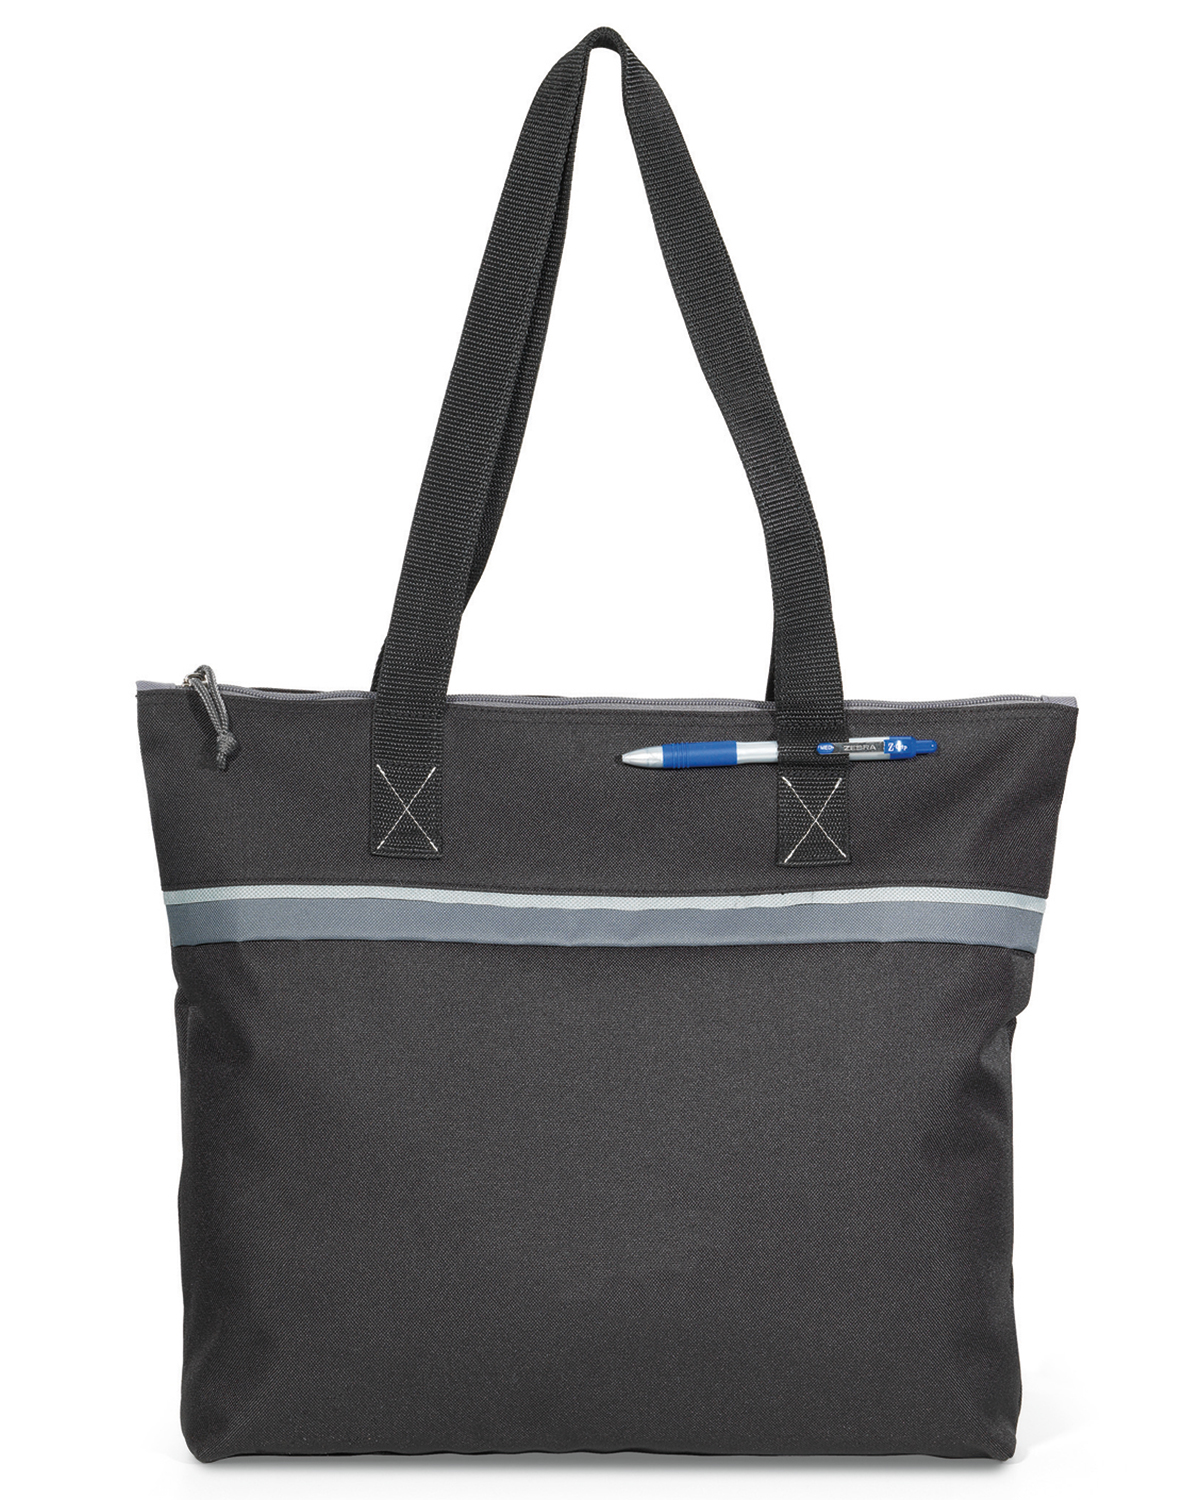 'Gemline GL1610 Muse Convention Tote'